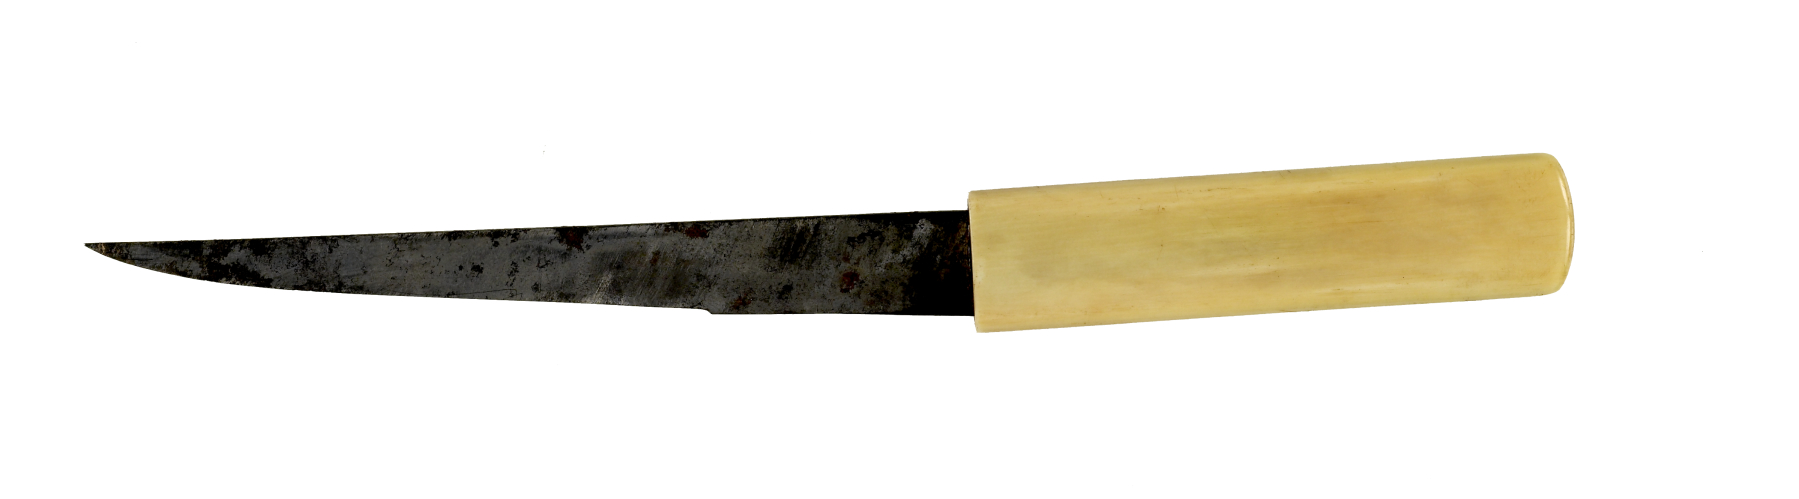 Image for Kozuka with Buddhist Implements